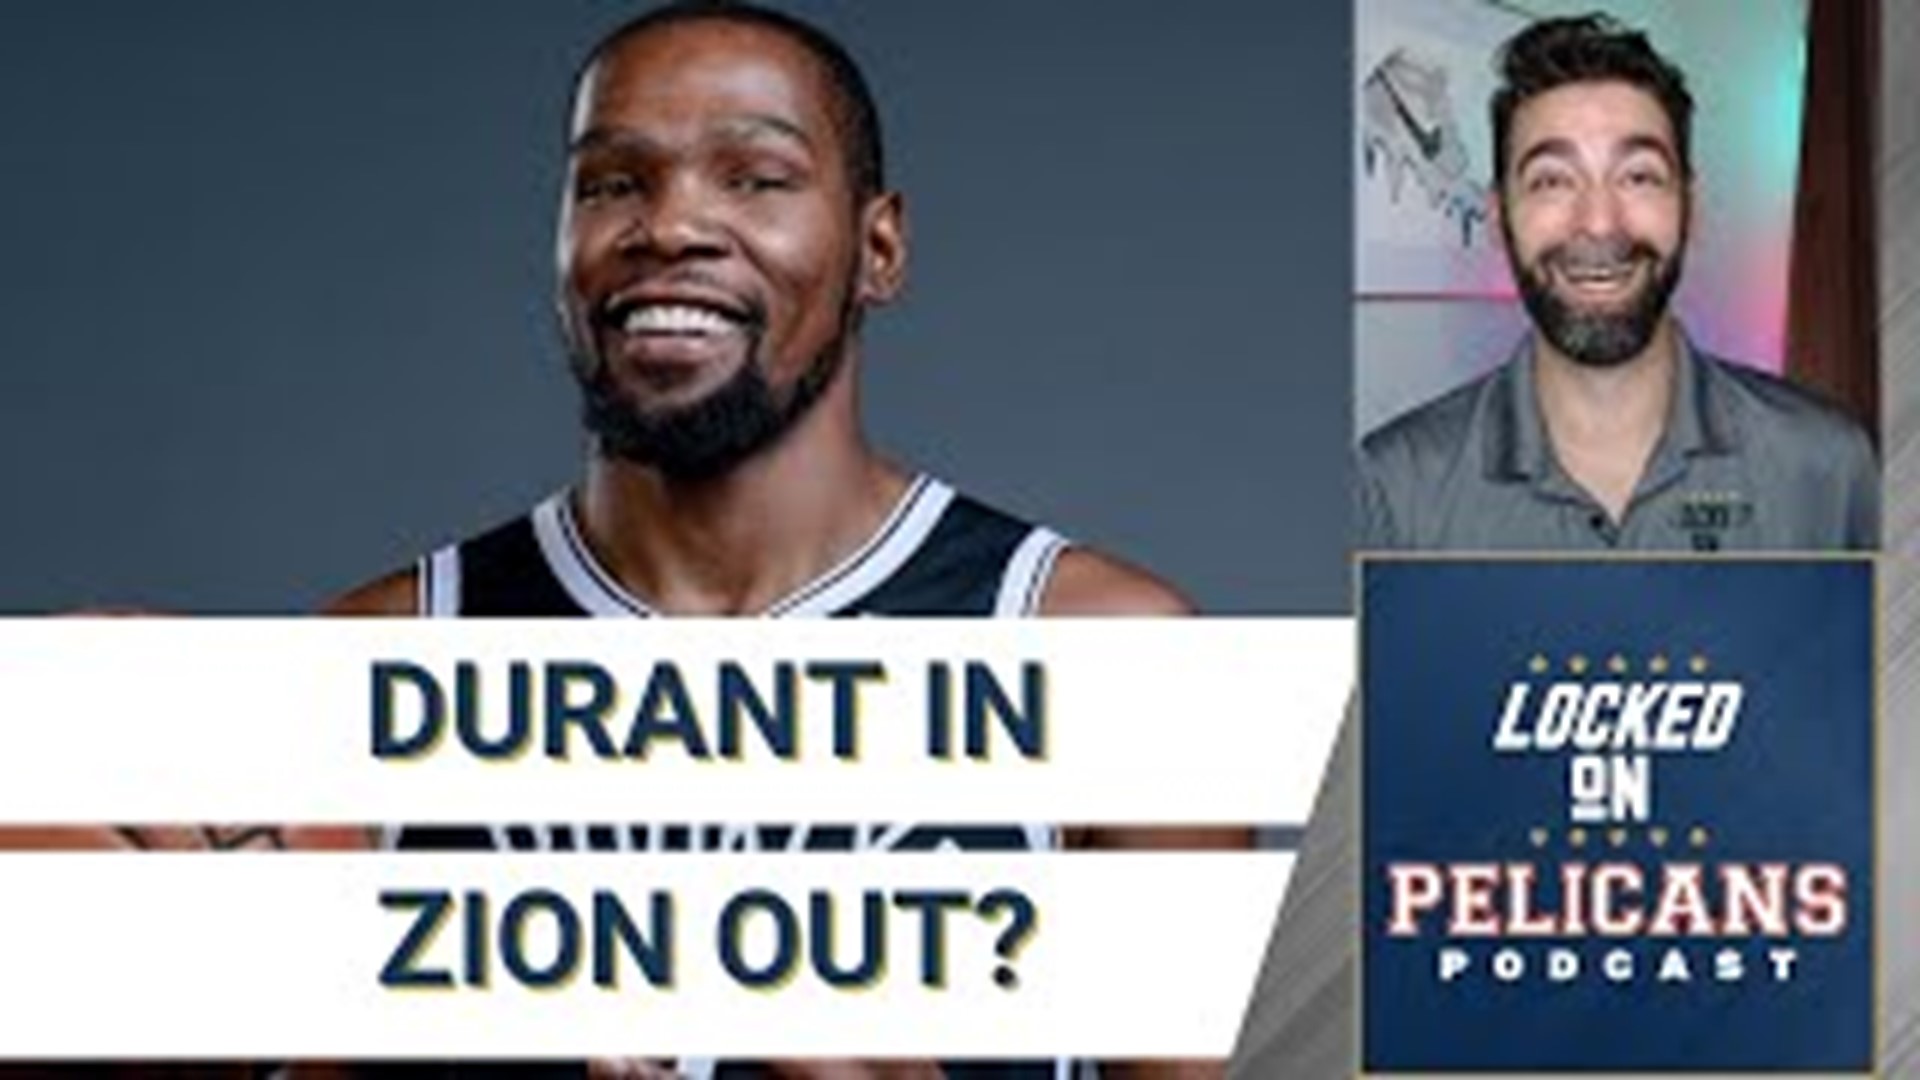 Should the New Orleans Pelicans go after Durant and would they include Zion Williamson or Brandon Ingram in a trade for him?